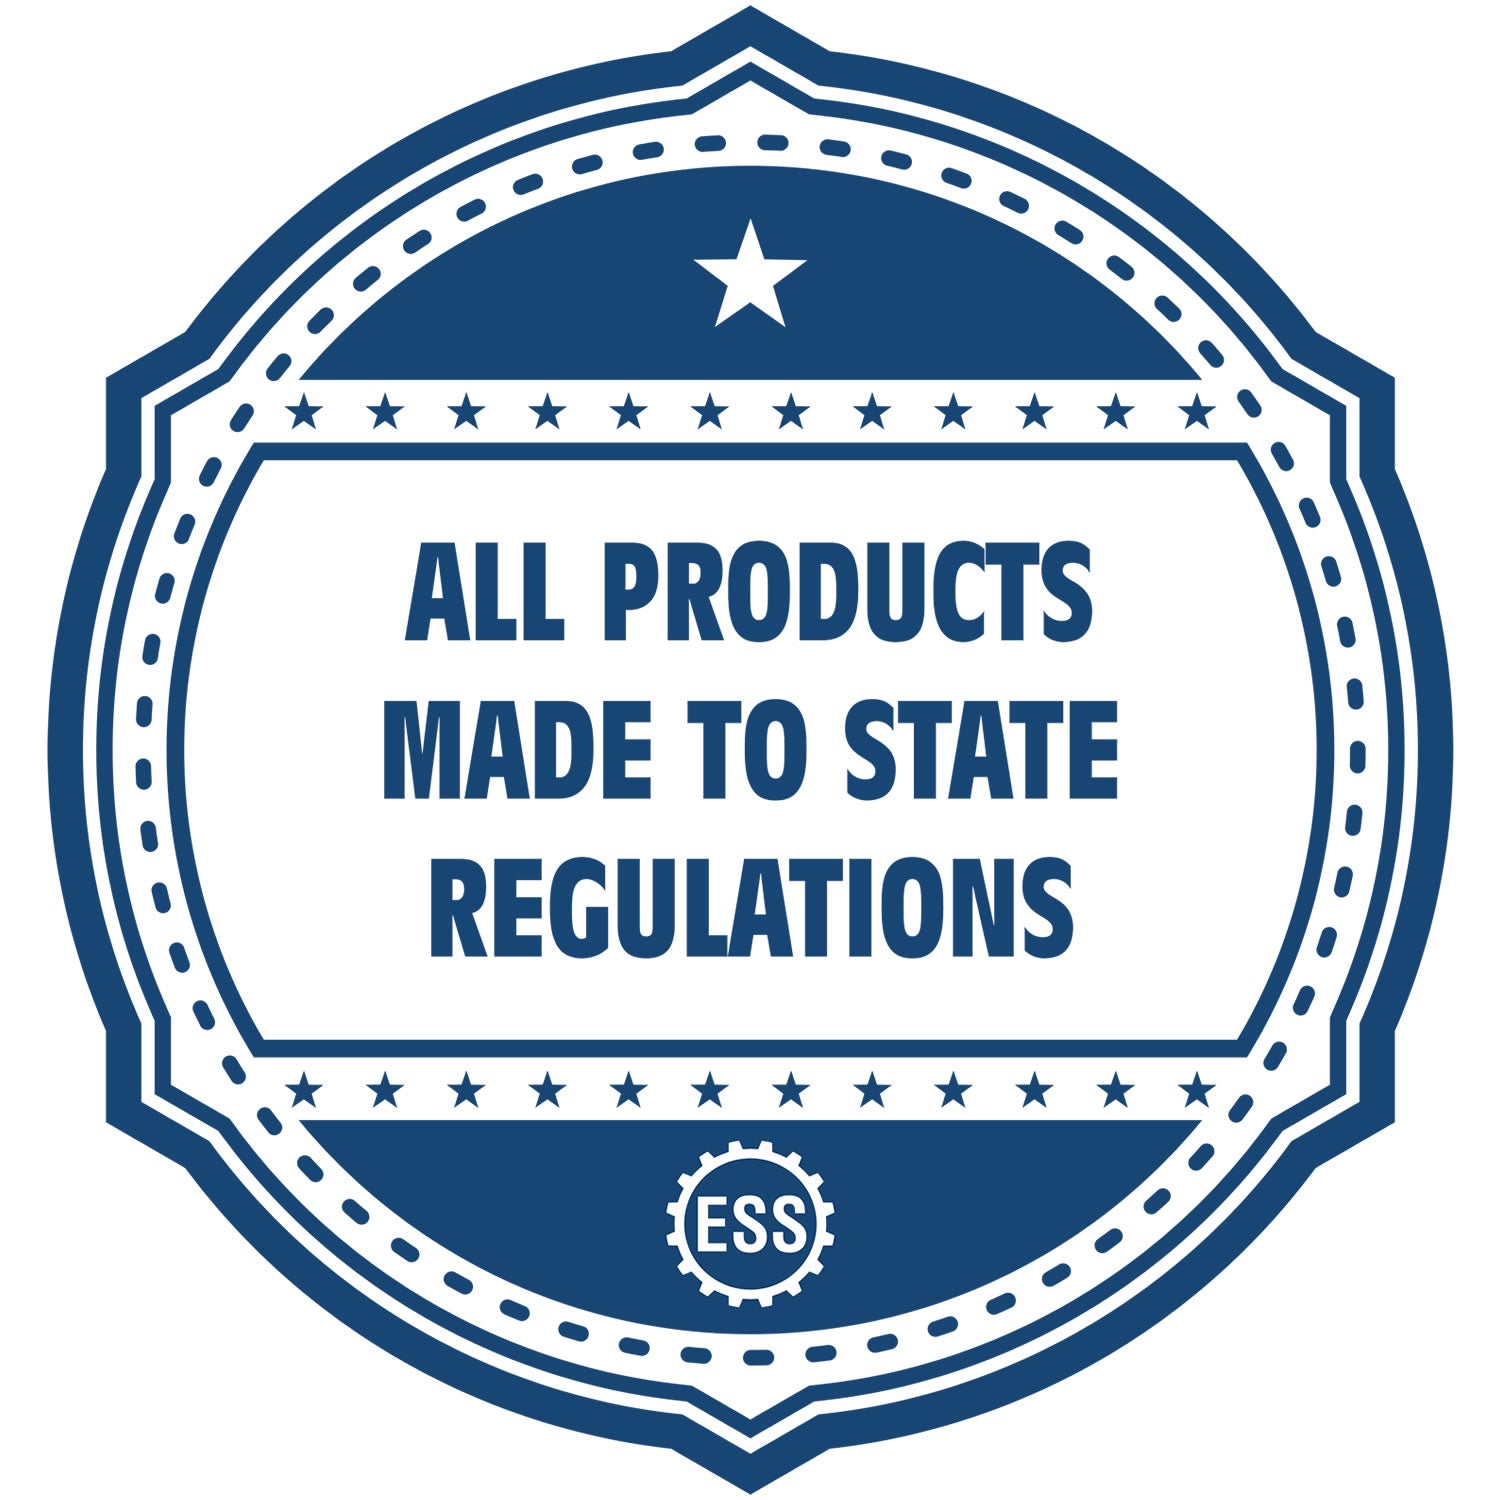 An icon or badge element for the State of Tennessee Handheld Landscape Architect Seal showing that this product is made in compliance with state regulations.